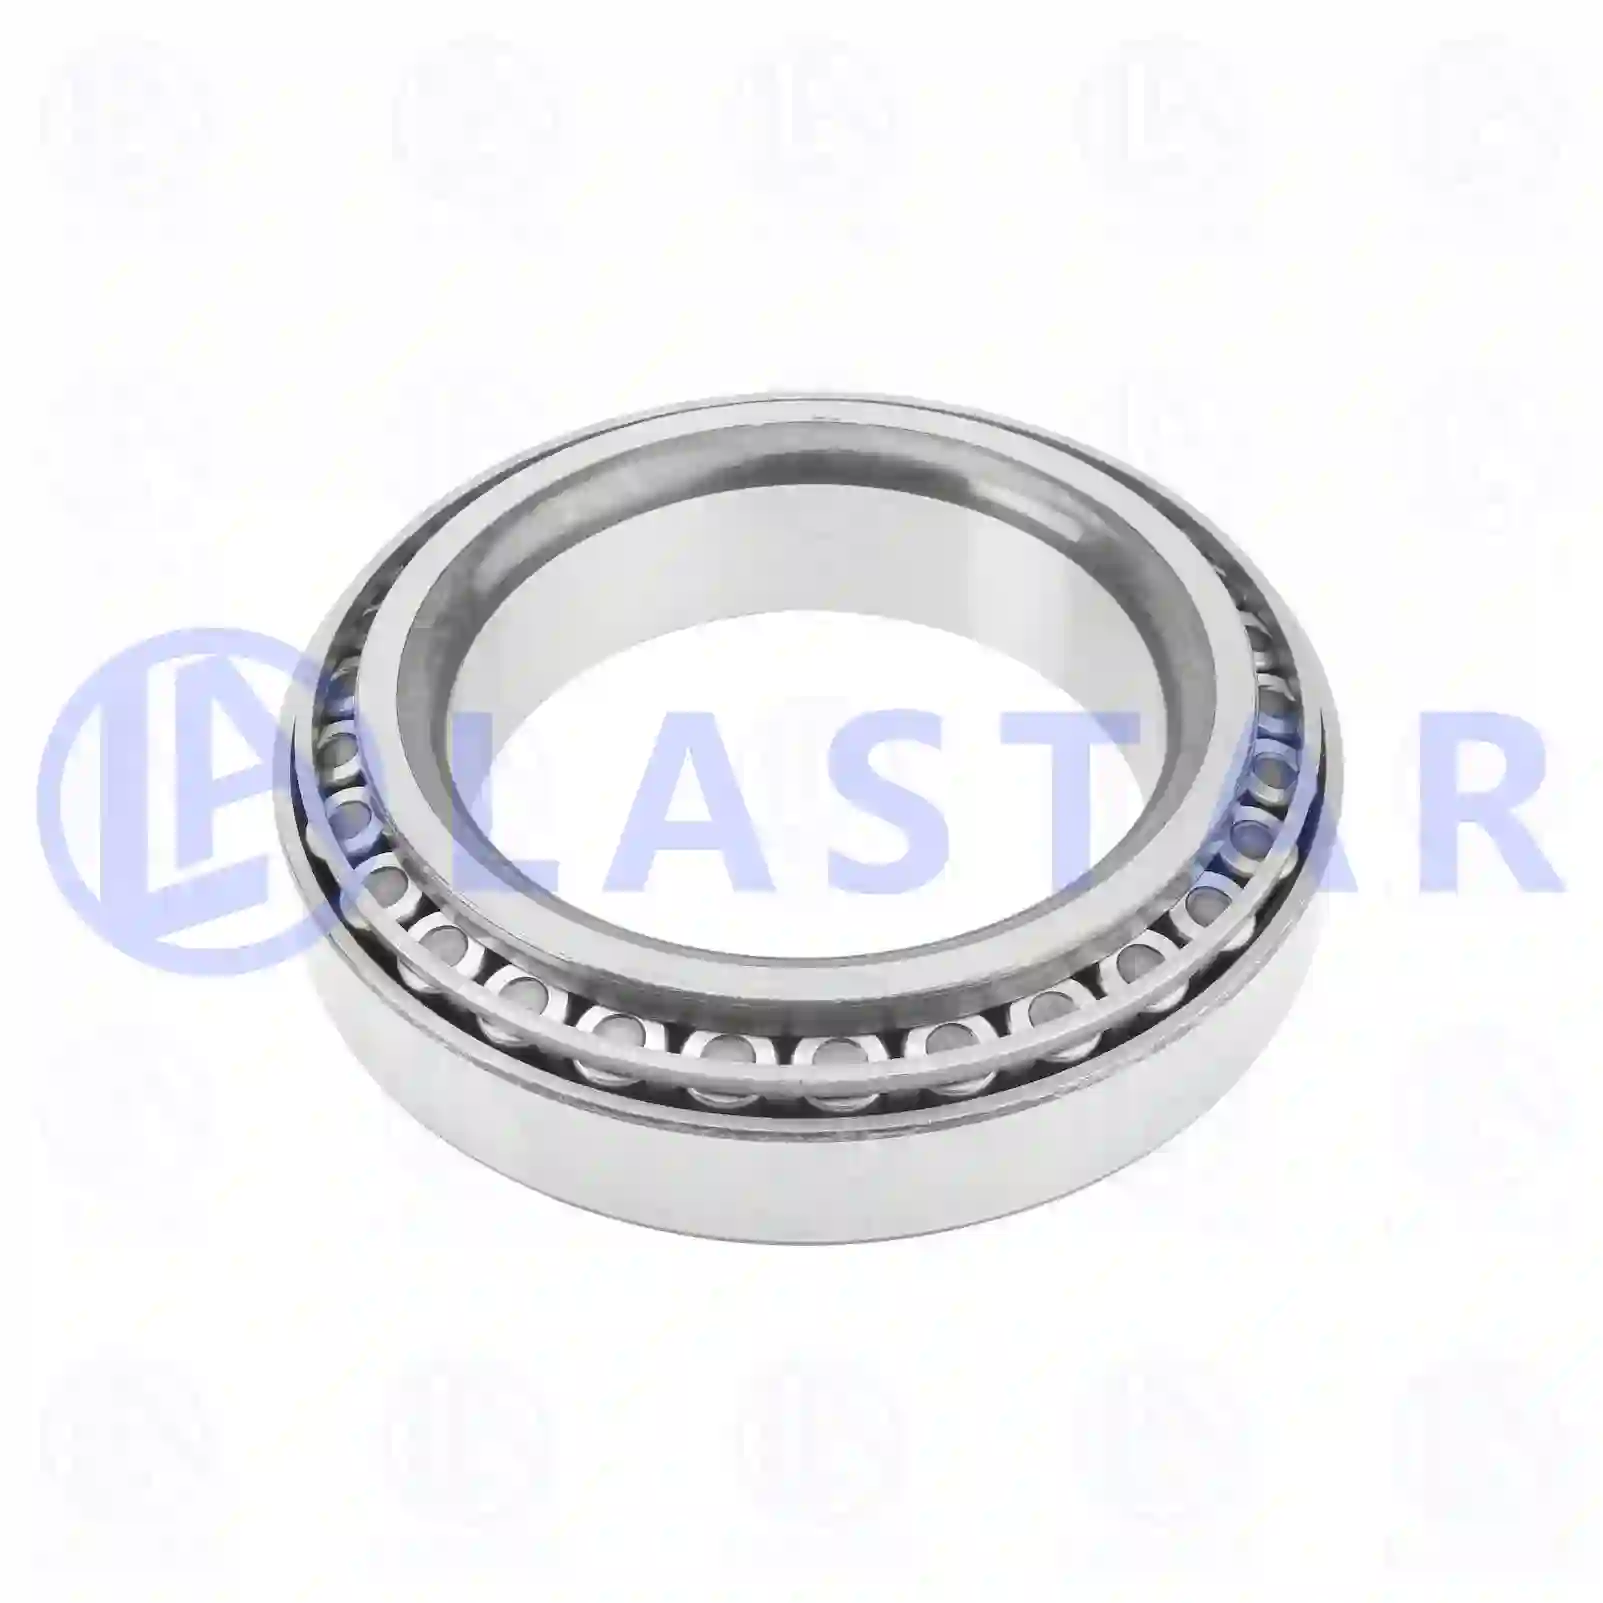 Hub Tapered roller bearing, la no: 77726055 ,  oem no:06324890009, 06324890030, 81934200089, 0019802502, 0049811905, 0049812005 Lastar Spare Part | Truck Spare Parts, Auotomotive Spare Parts